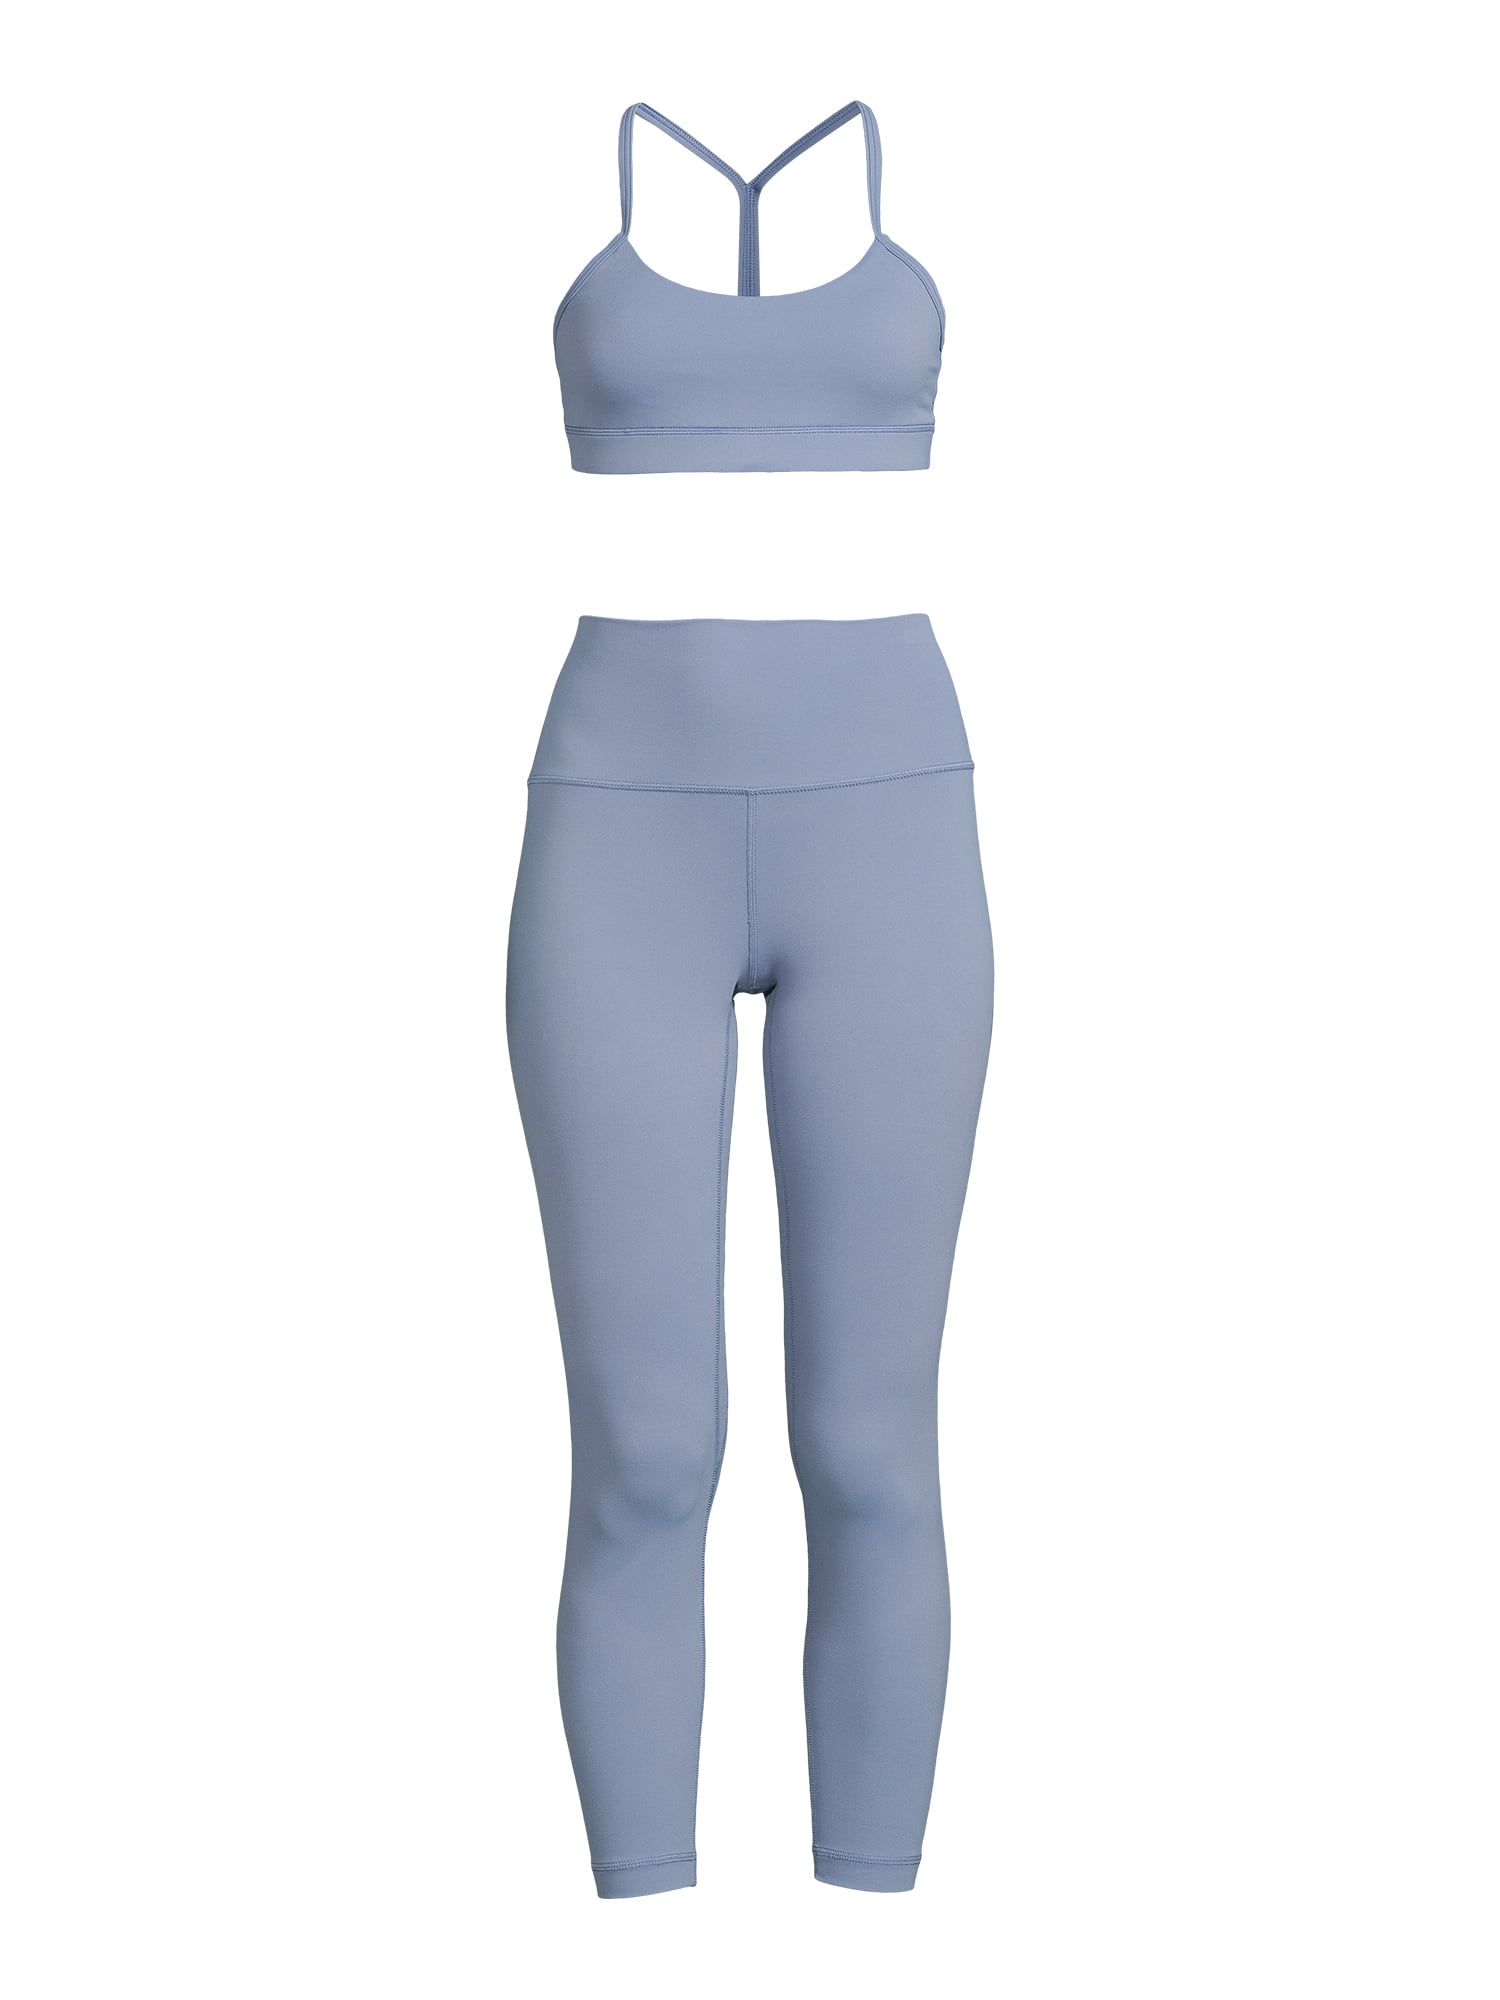 Dropship 2 Pieces Contrast Color Patchwork Yoga Set, Wide Strap Sports Bra  & Overlap Leggings, Women's Activewear to Sell Online at a Lower Price